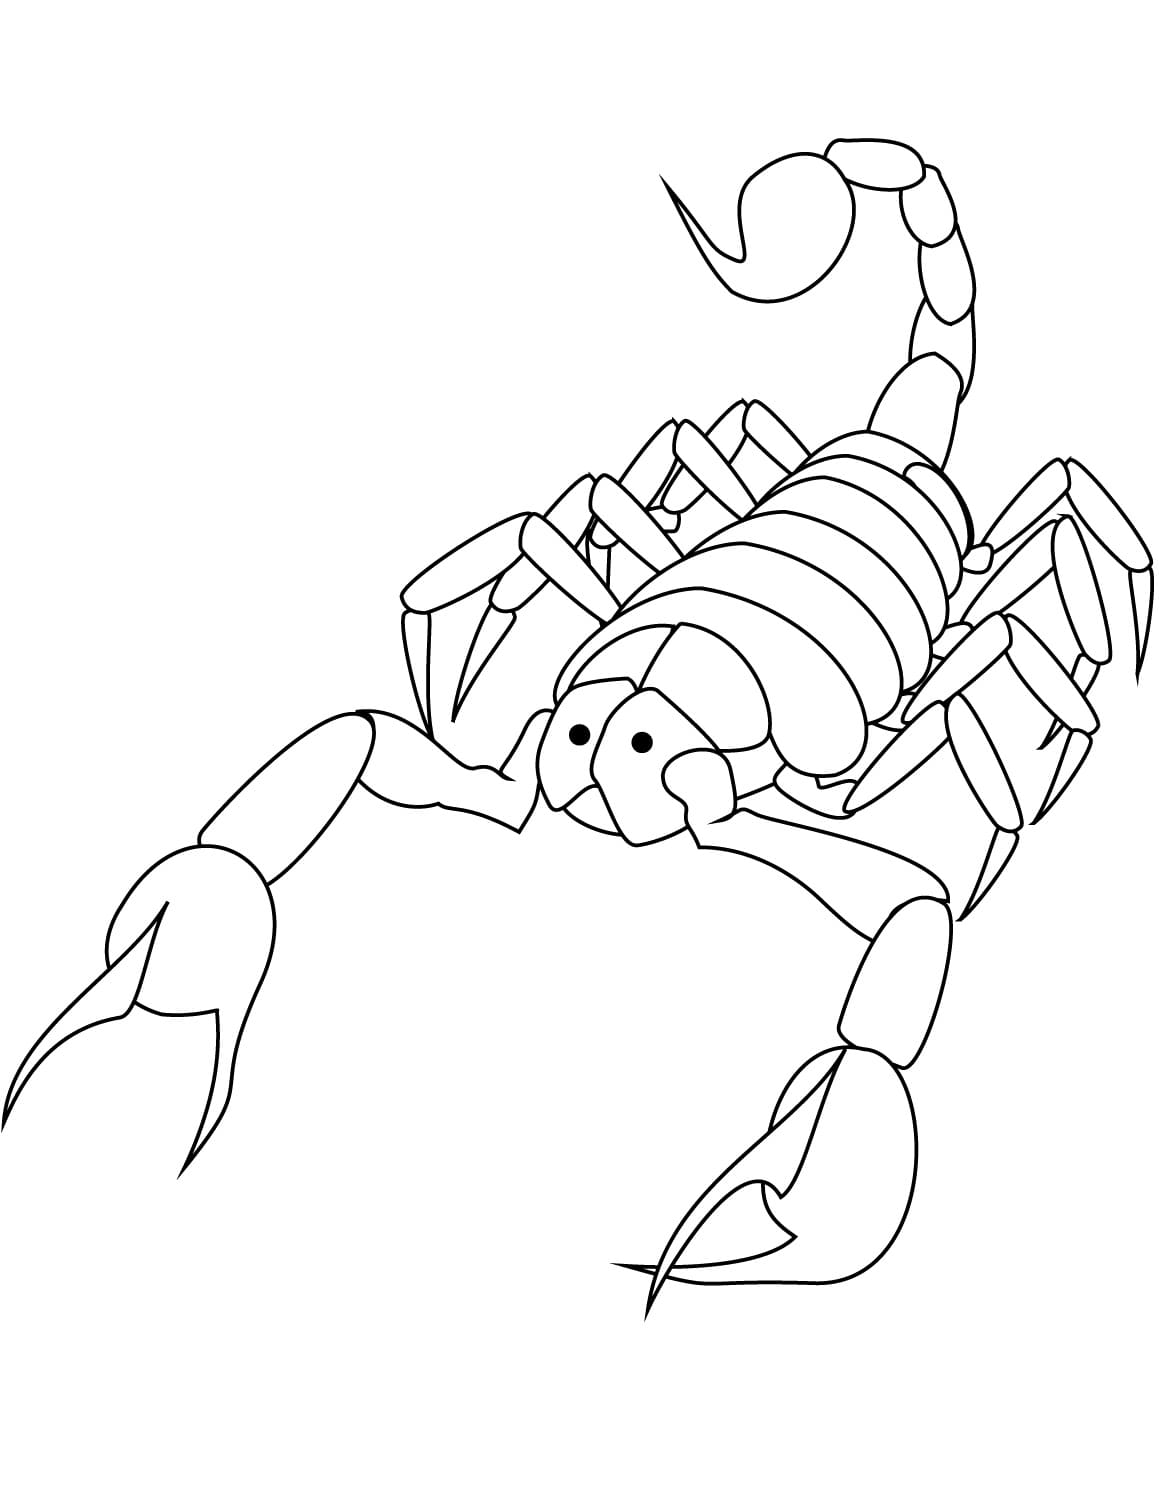 Print Scorpion Coloring Page - Free Printable Coloring Pages for Kids